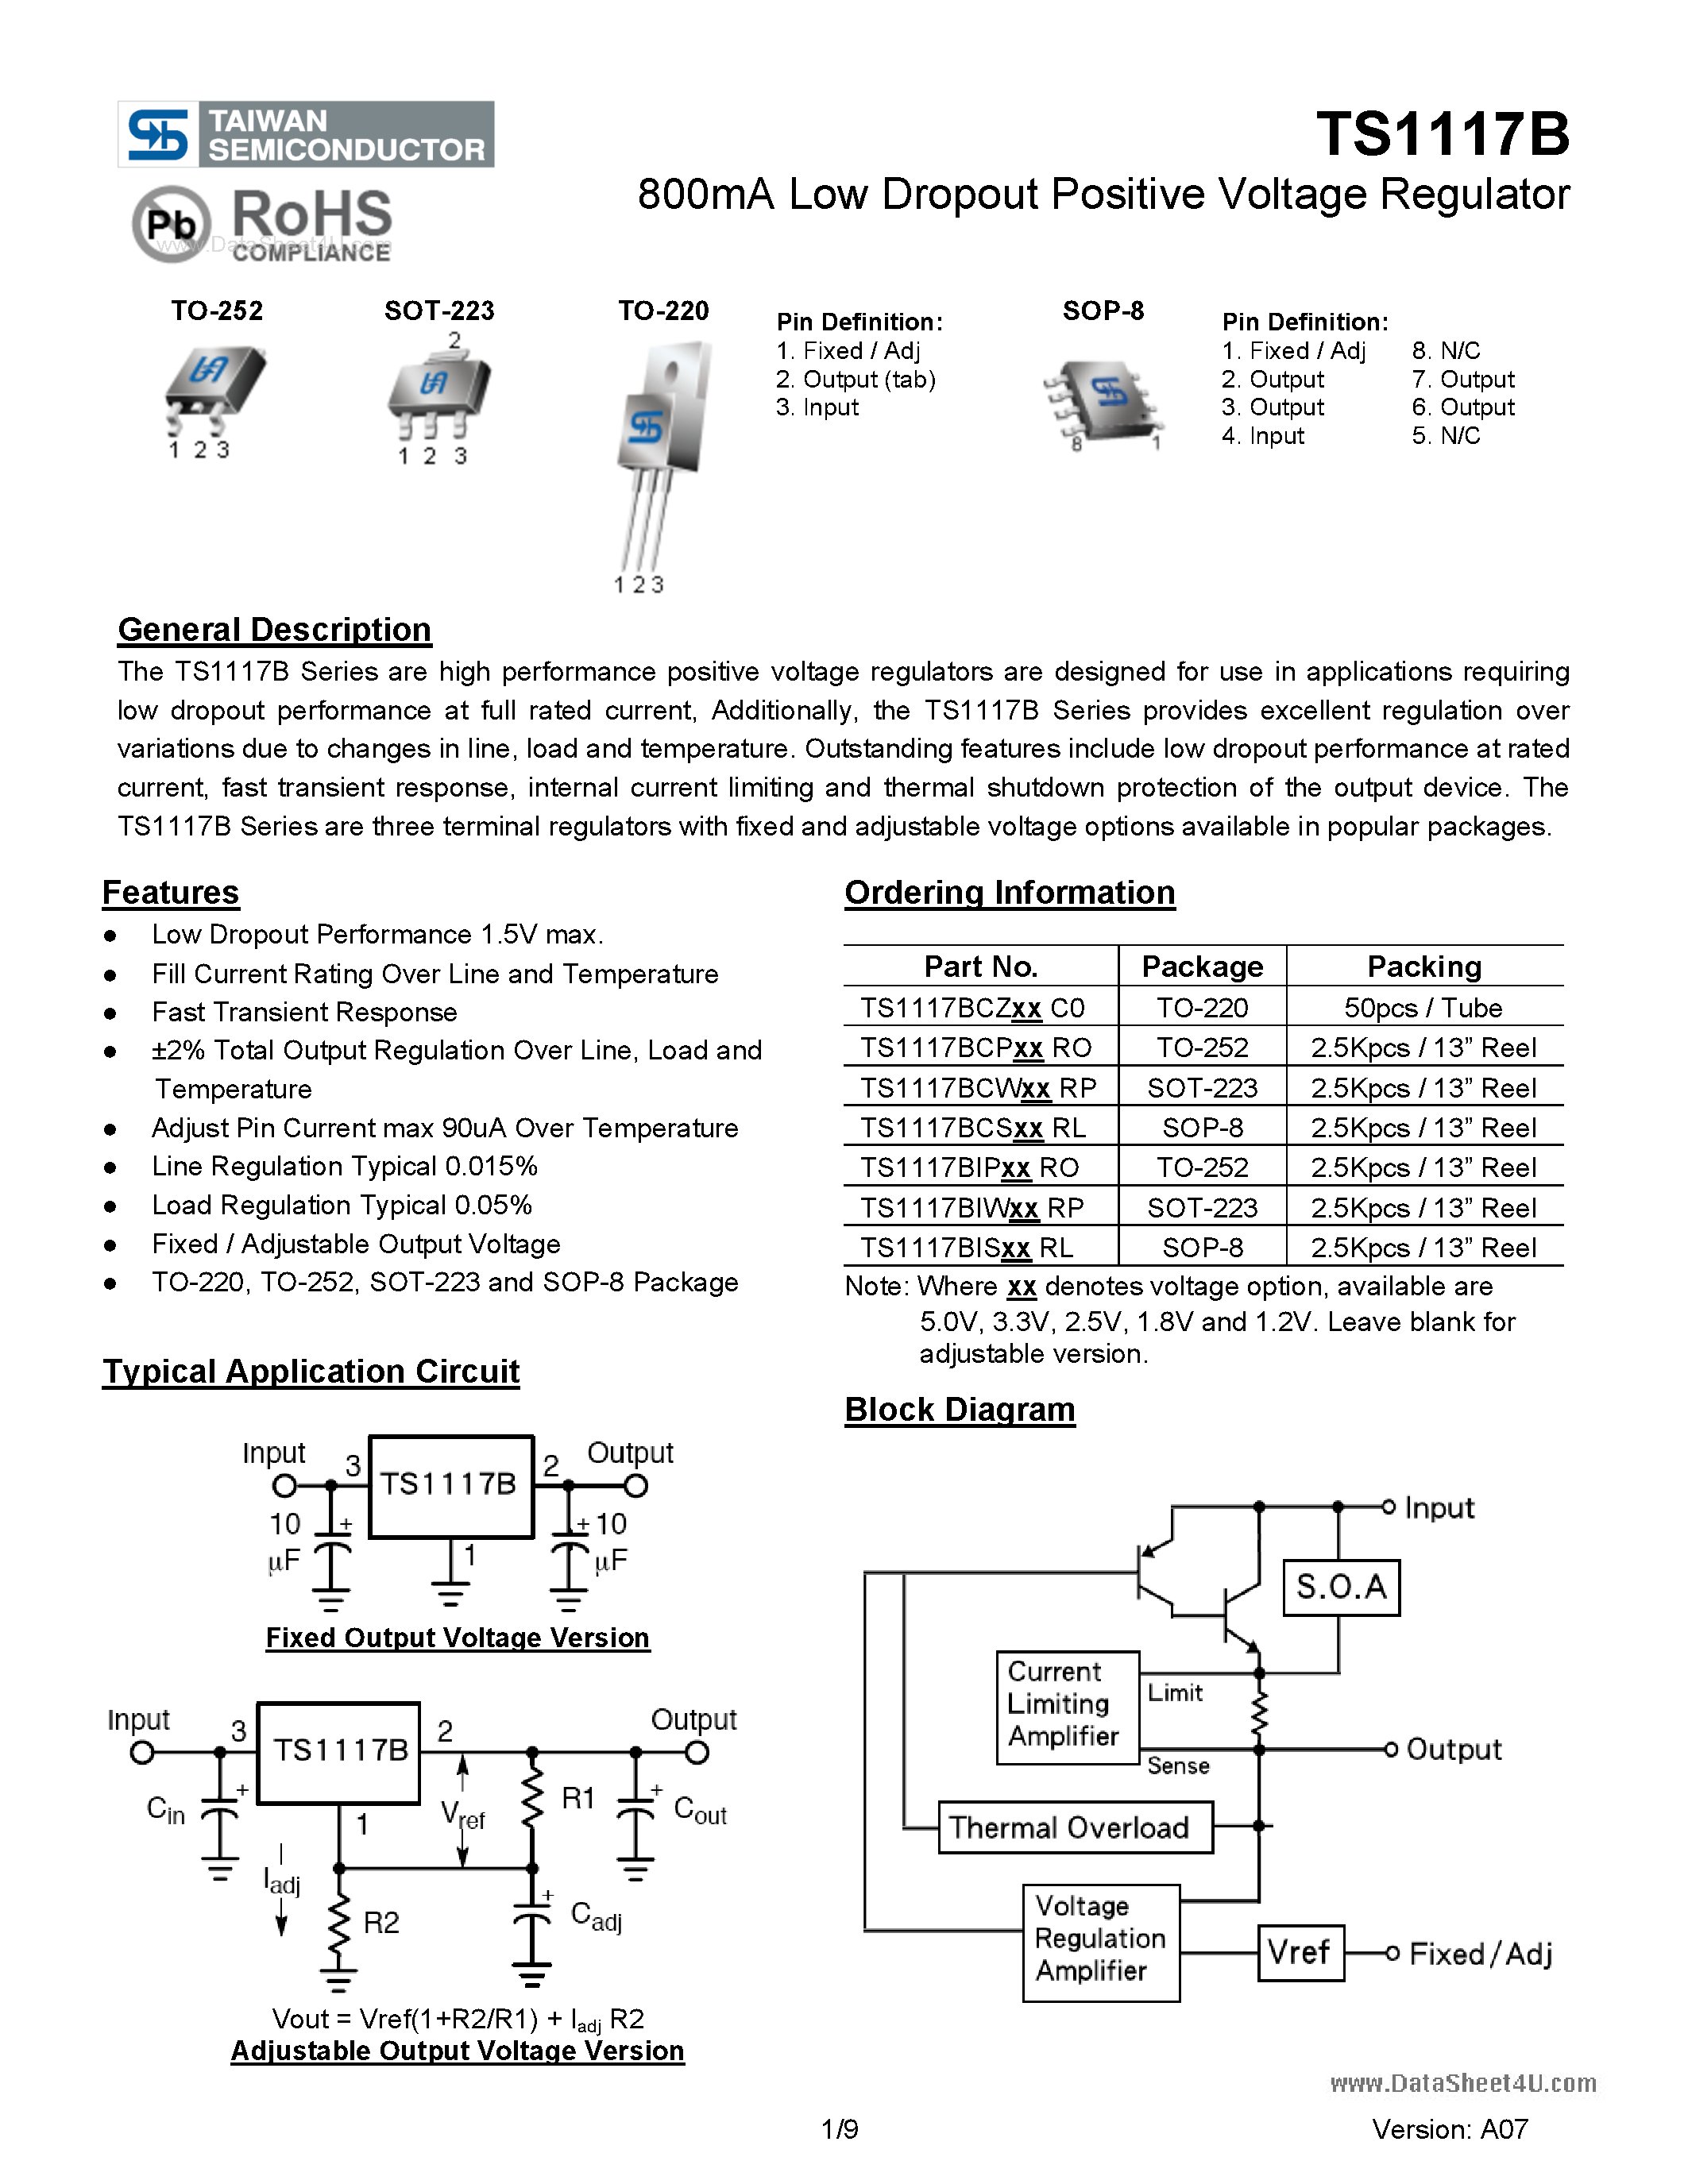 Datasheet TS1117B - 800mA Low Dropout Positive Voltage Regulator page 1